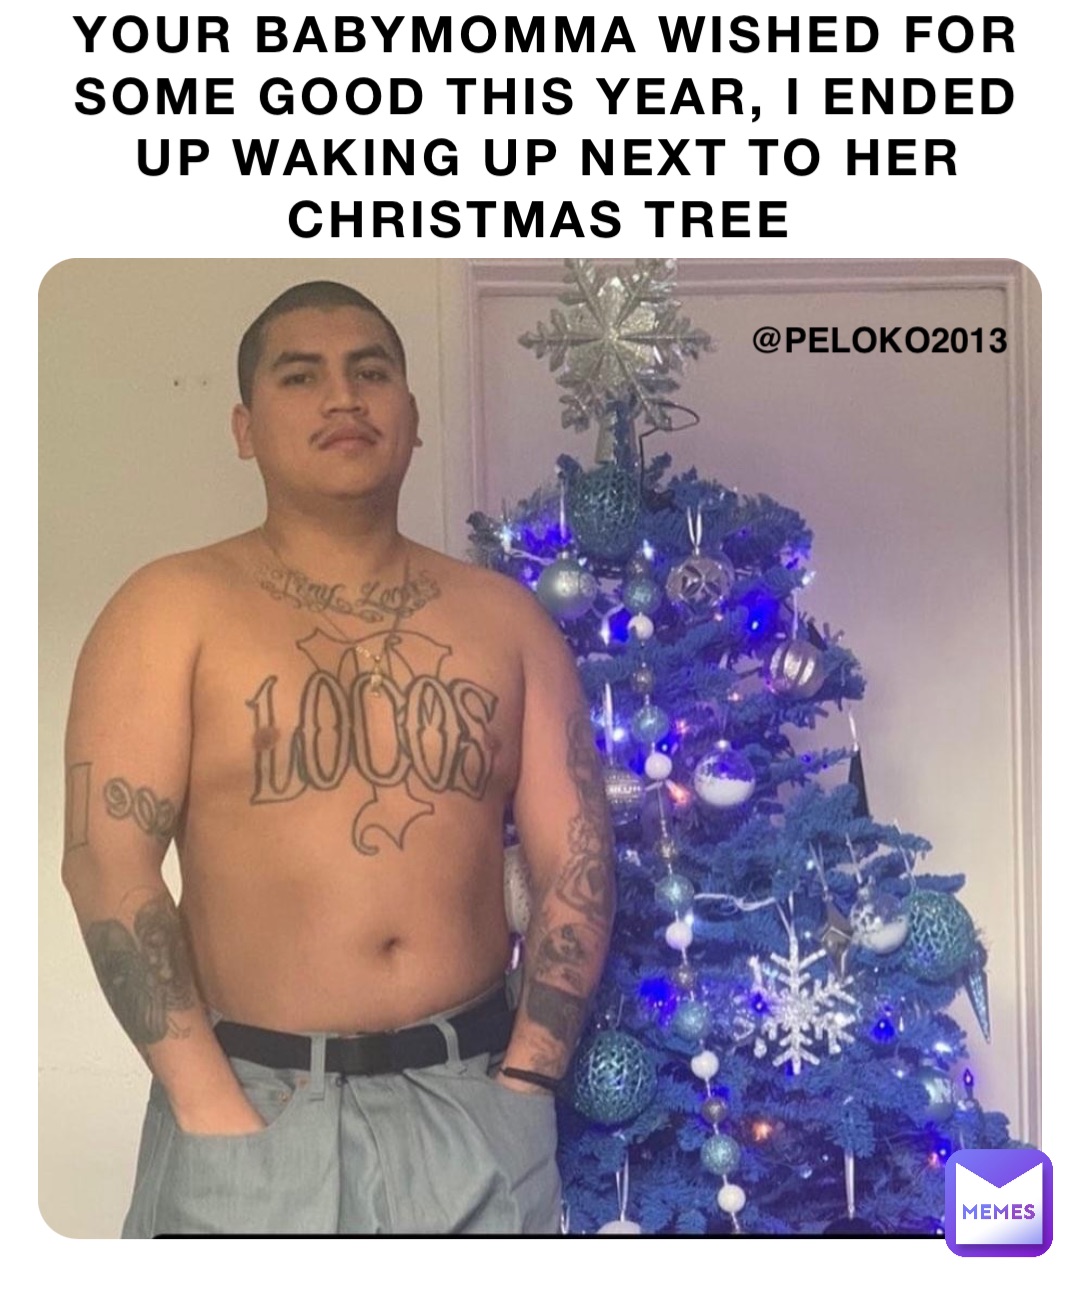 Your babymomma wished for some good this year, I ended up waking up next to her Christmas tree @peloko2013